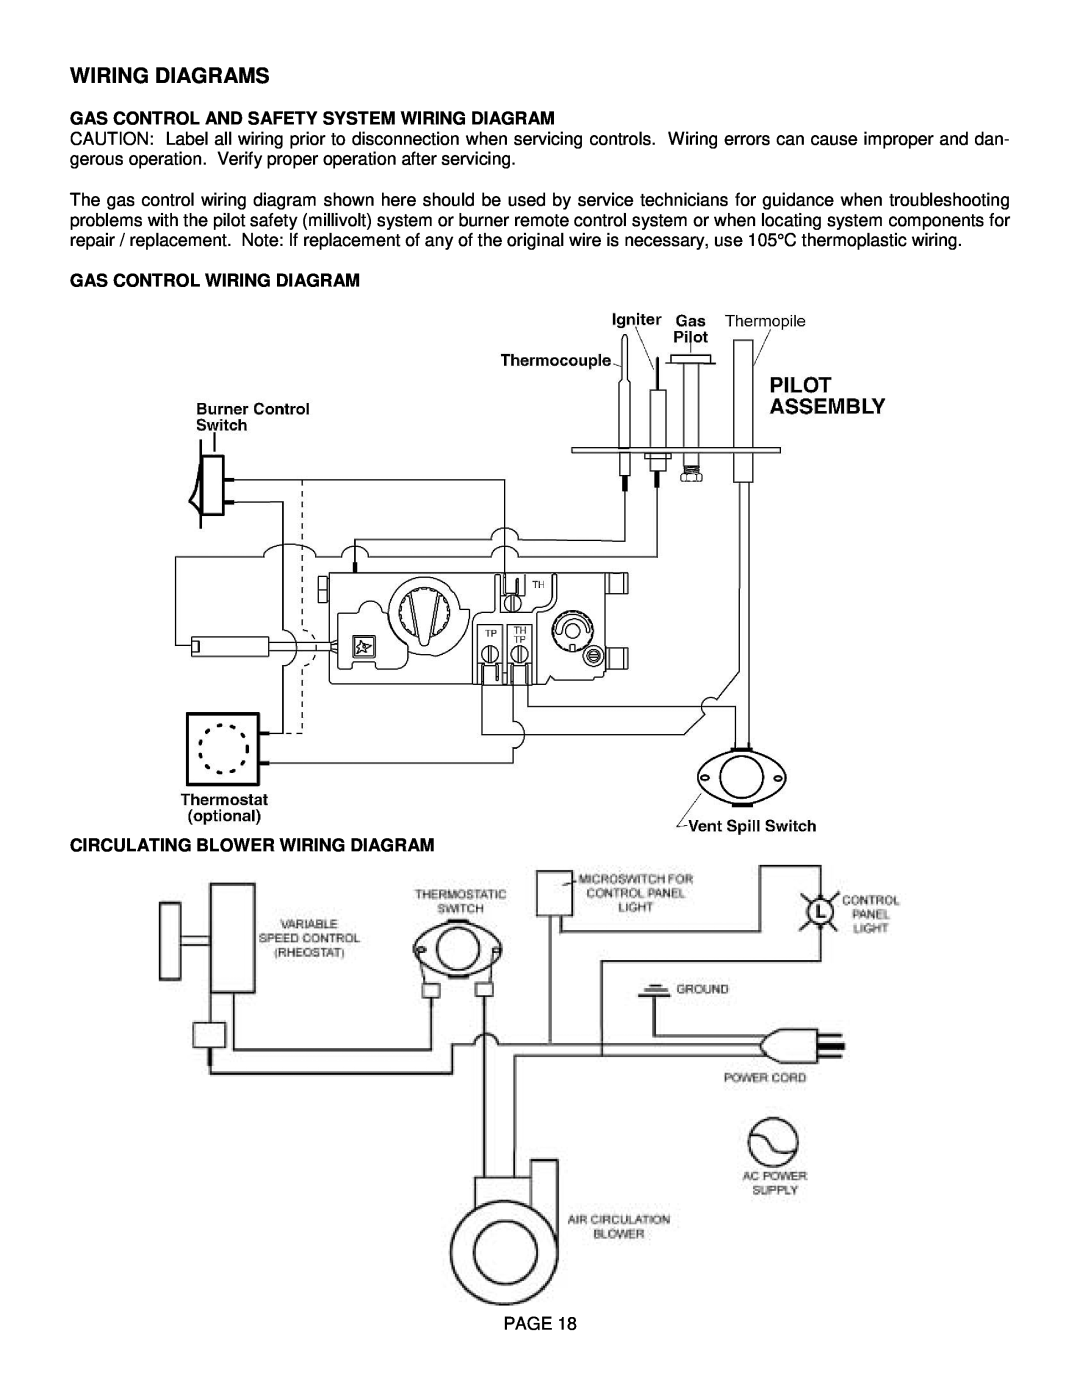 Lenoxx Electronics L30 BF-2 Wiring Diagrams, Gas Control And Safety System Wiring Diagram, Gas Control Wiring Diagram 